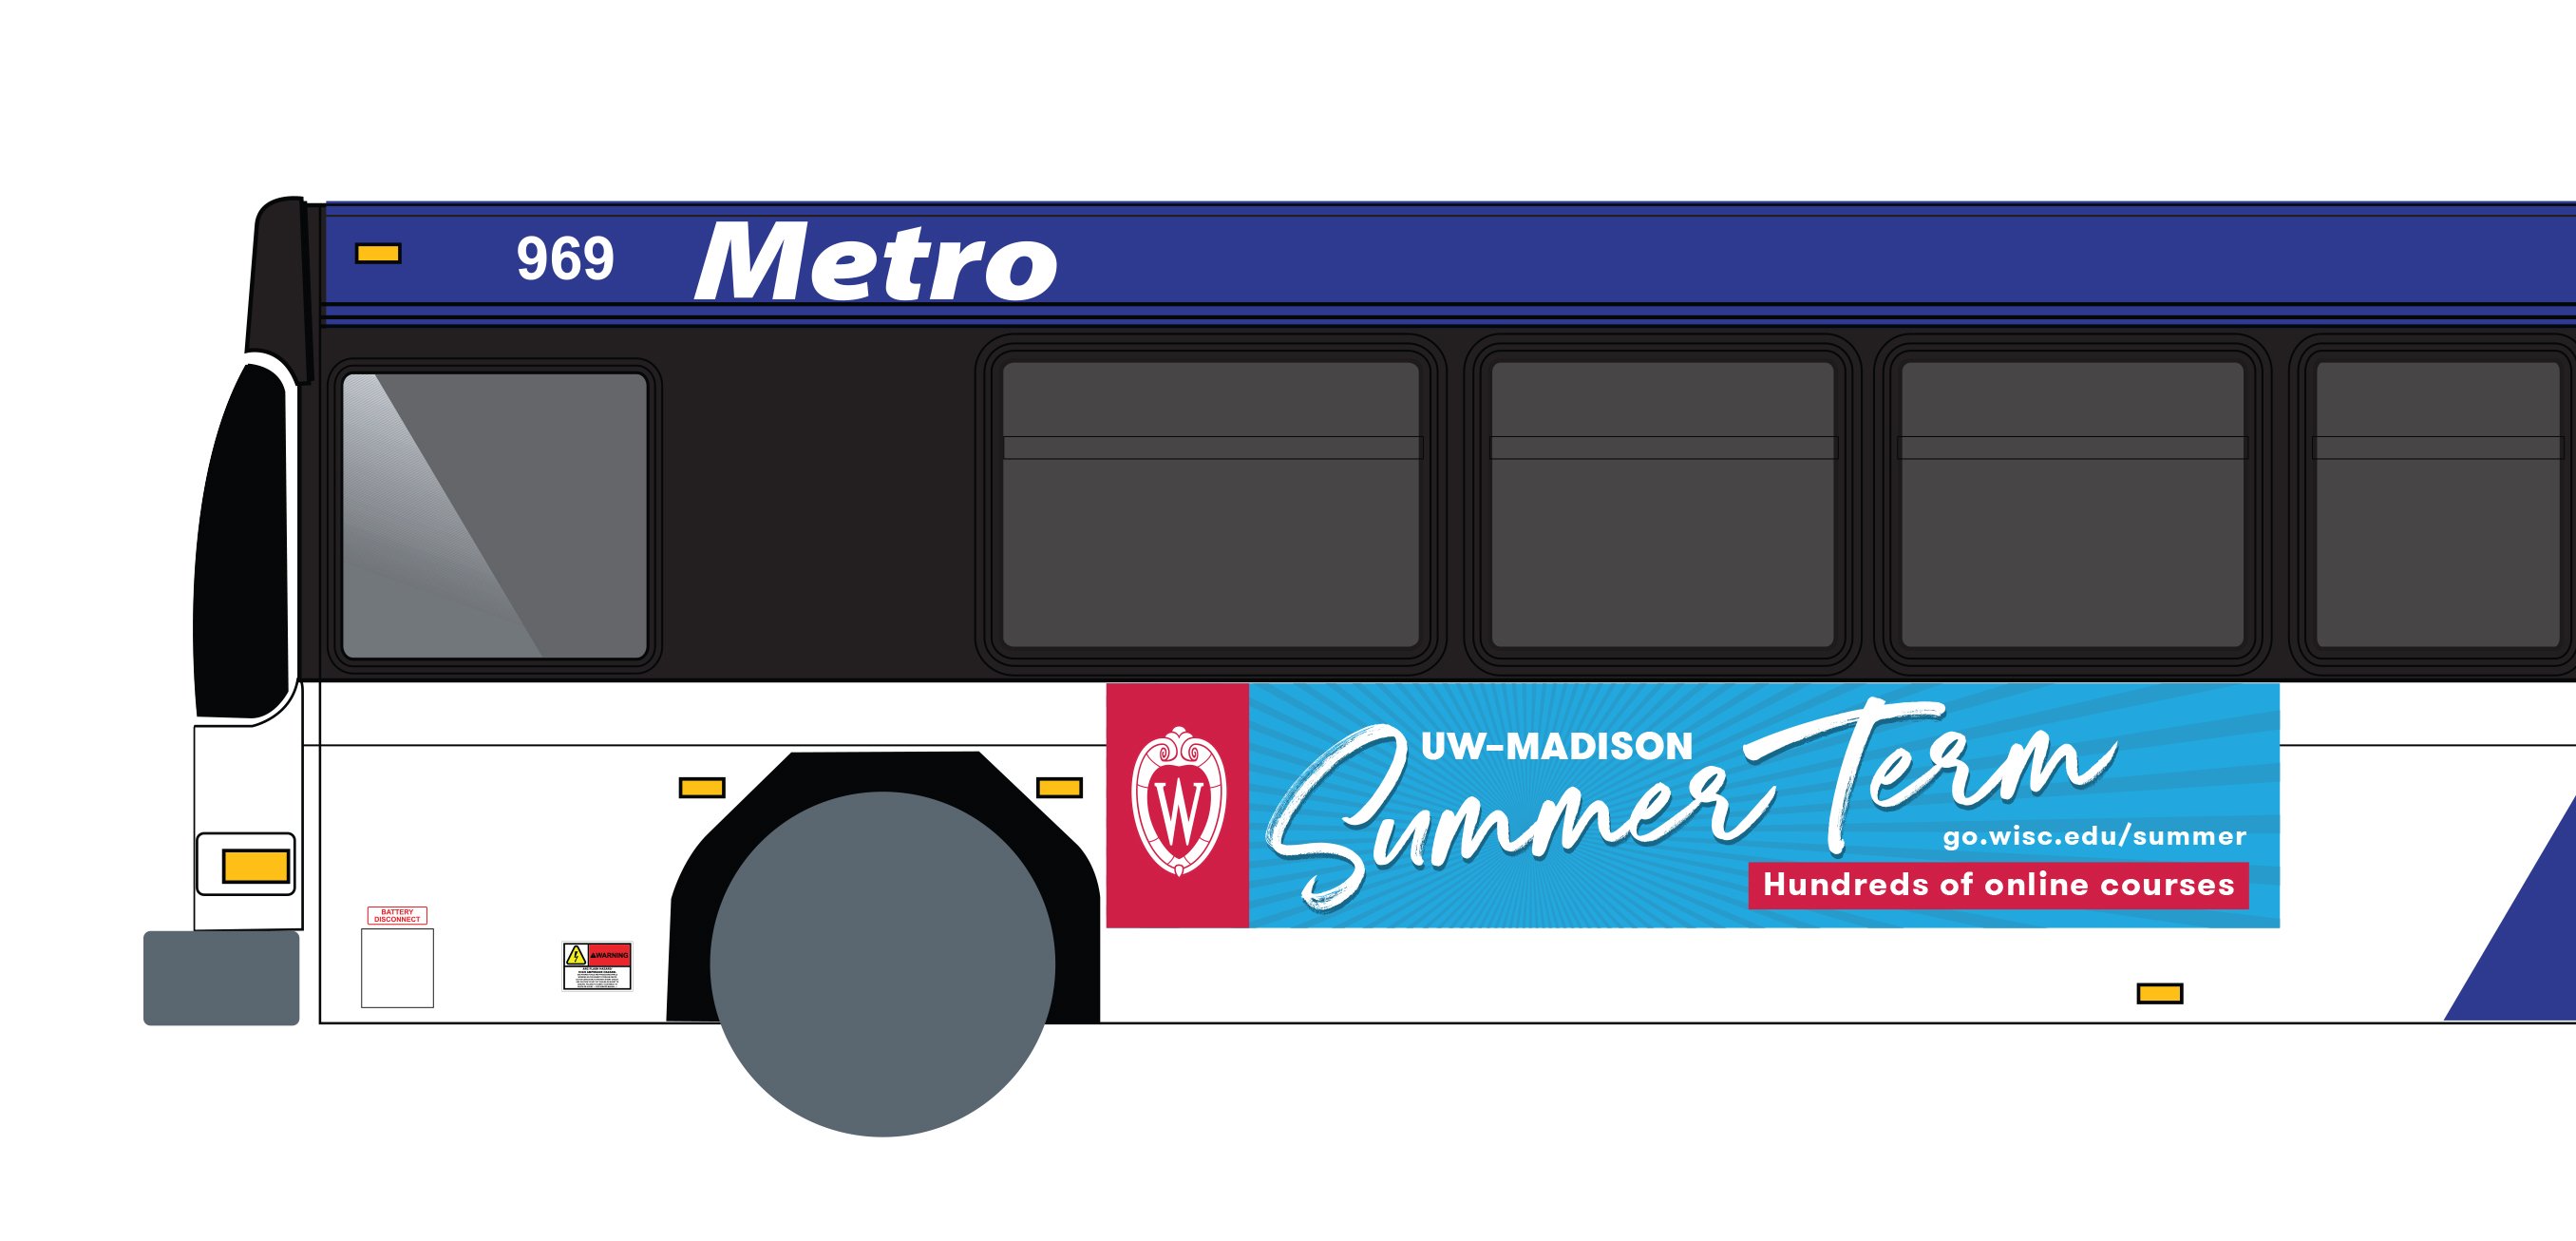 University of Wisconsin–Madison summer term transit signage including URL for more information